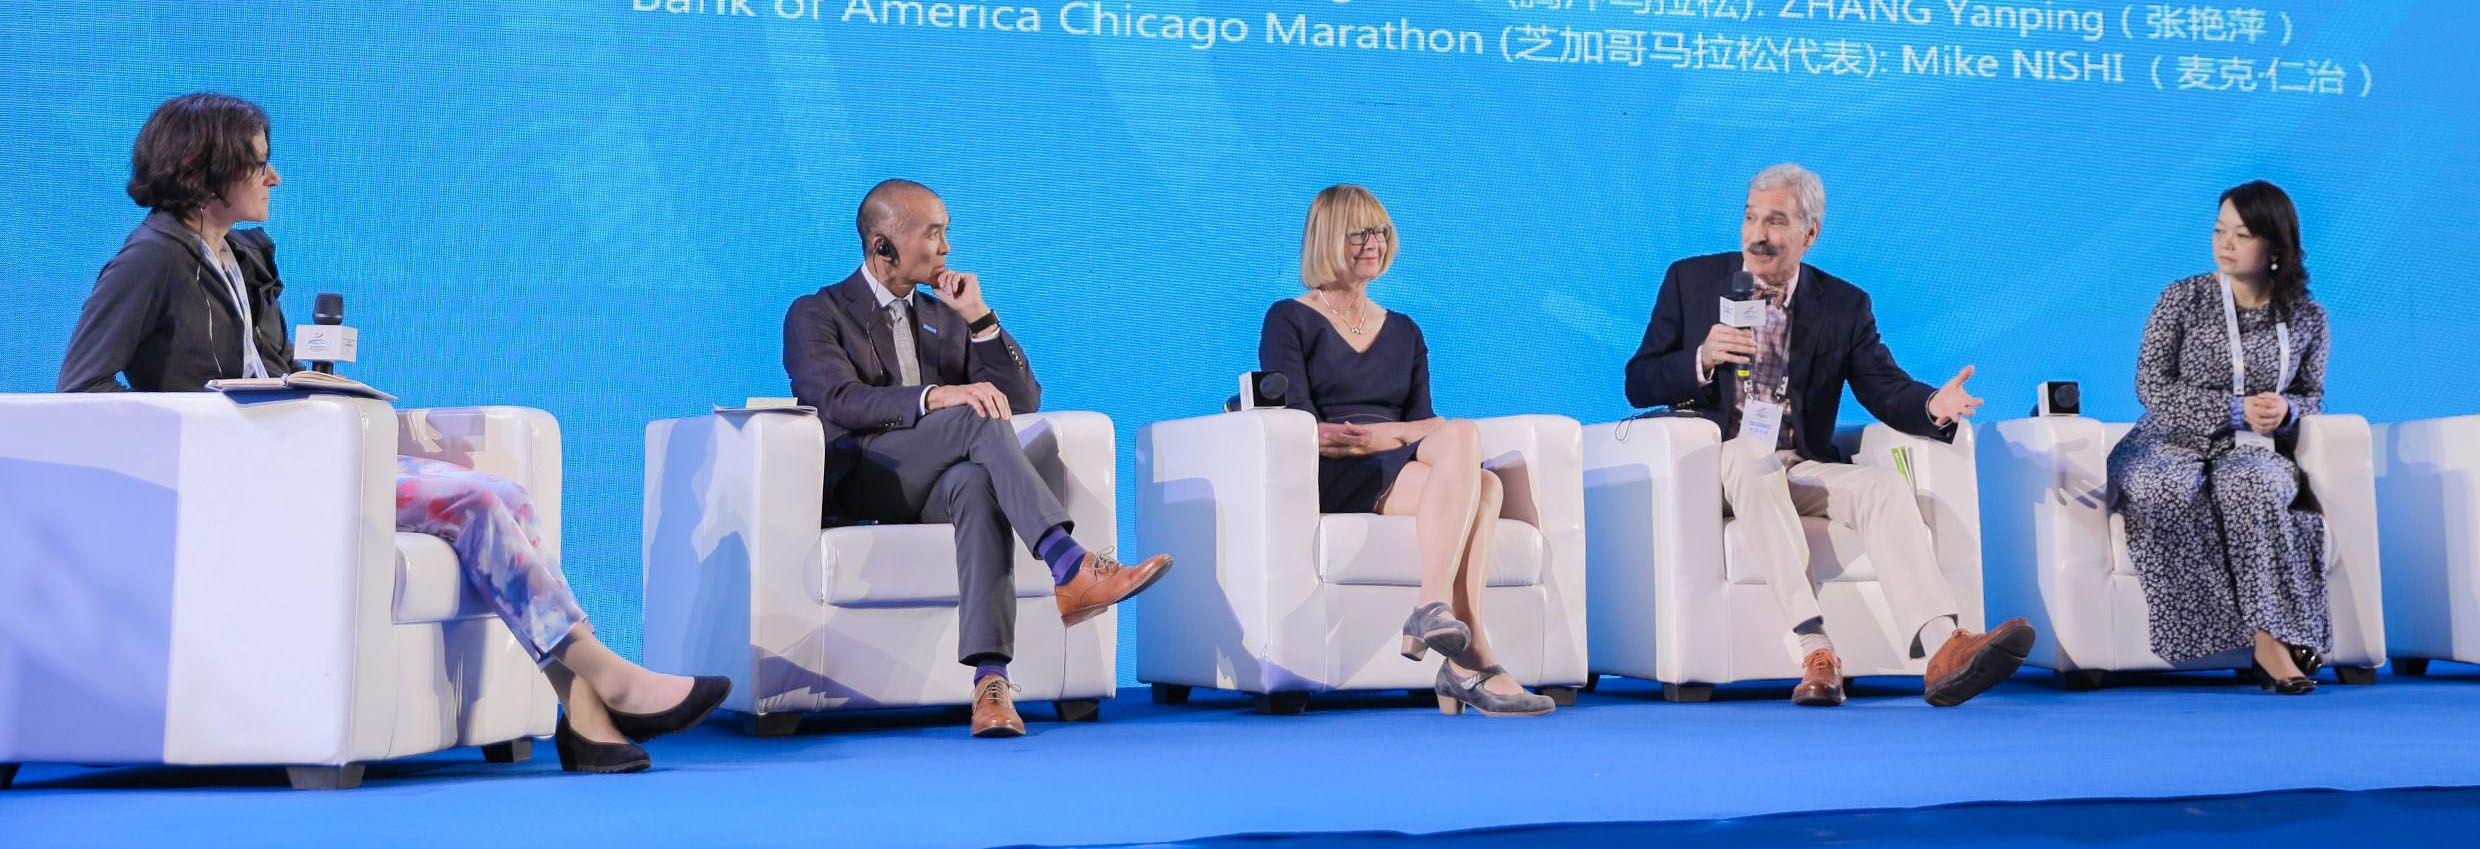 Panel discussion at the 2019 Global Running Conference in Lanzhou